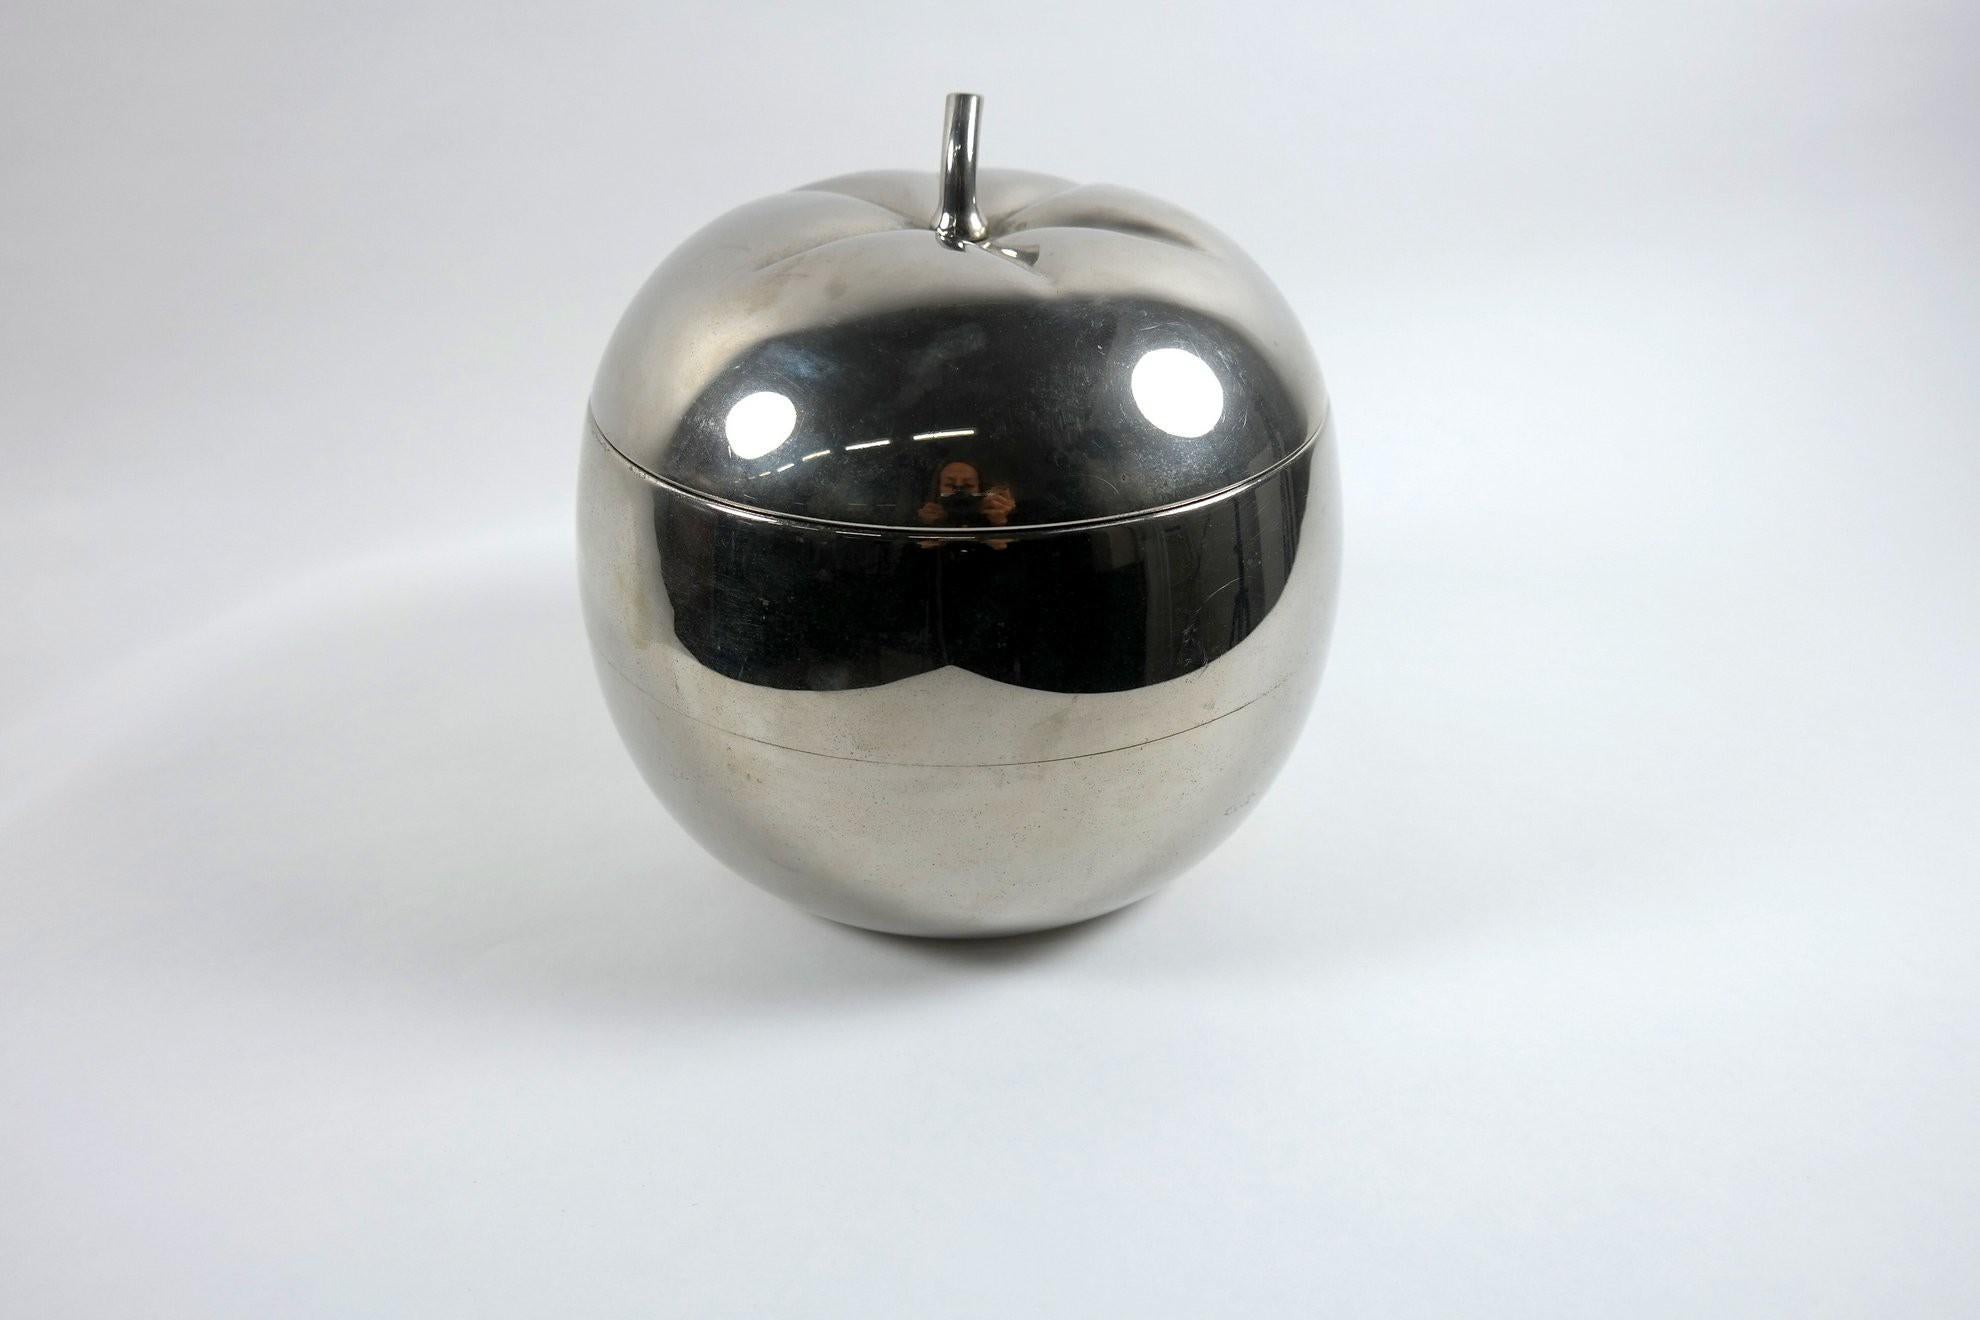 This apple shaped ice-bucket was designed by Hans Turnwald for Freddotherm, 1970's. It's a chrome-plated, Dual layer plastic object. It's marked with the original plastic stamp on the base.